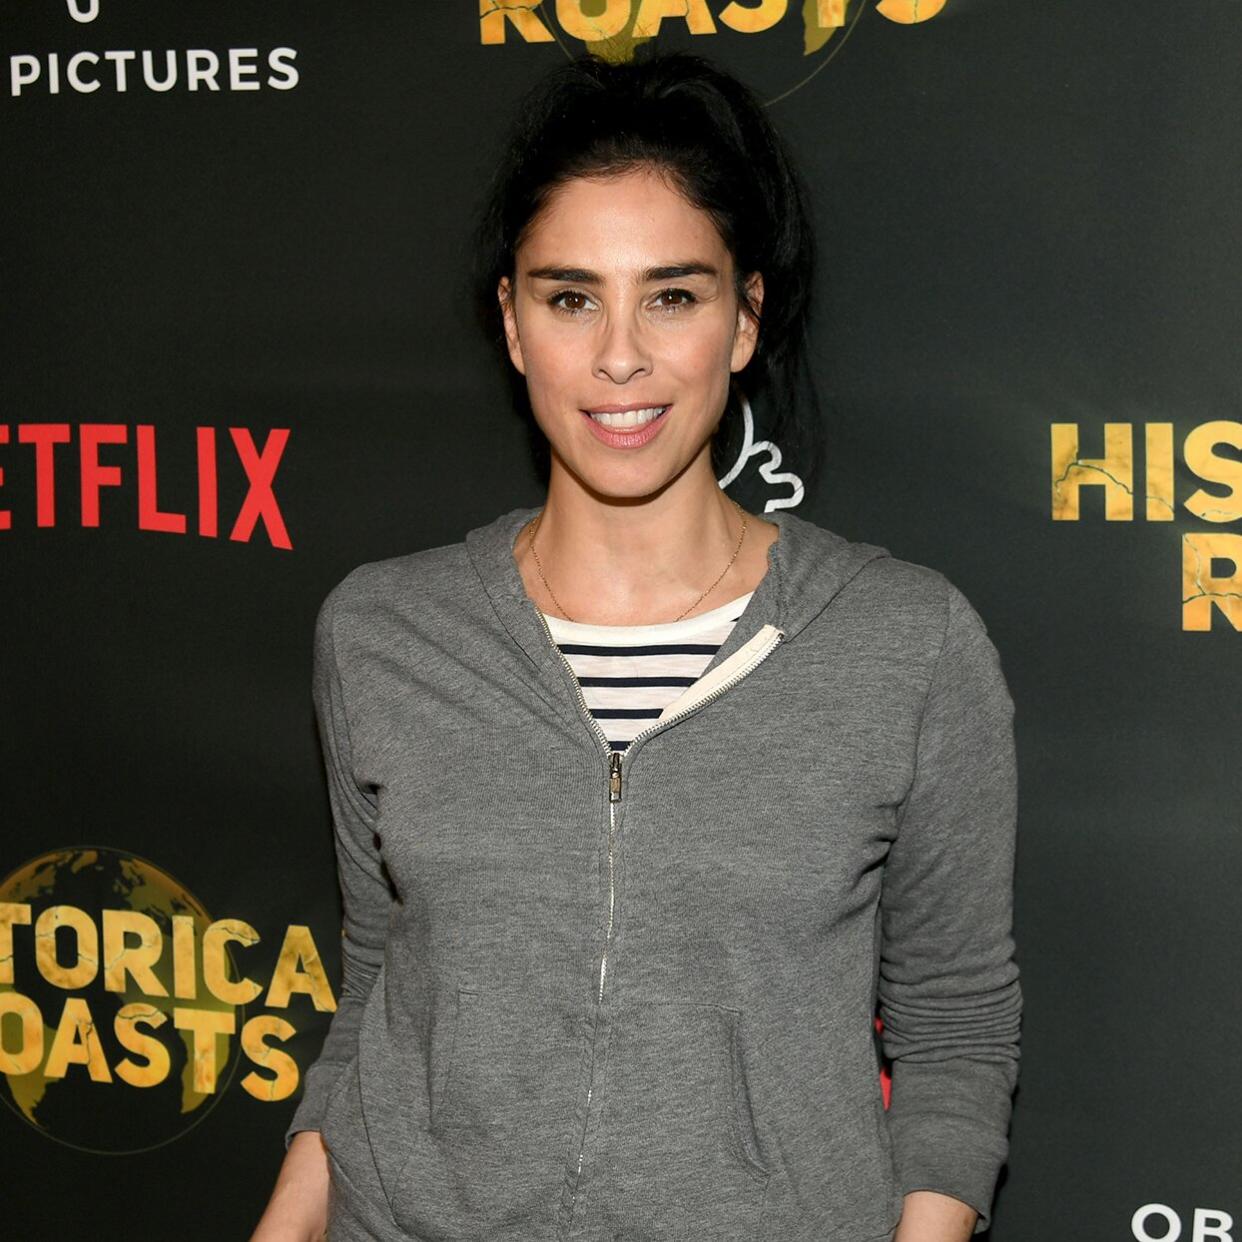 Sarah Silverman arrives at the premiere party for the OBB Pictures and Netflix Original Series "Historical Roasts"